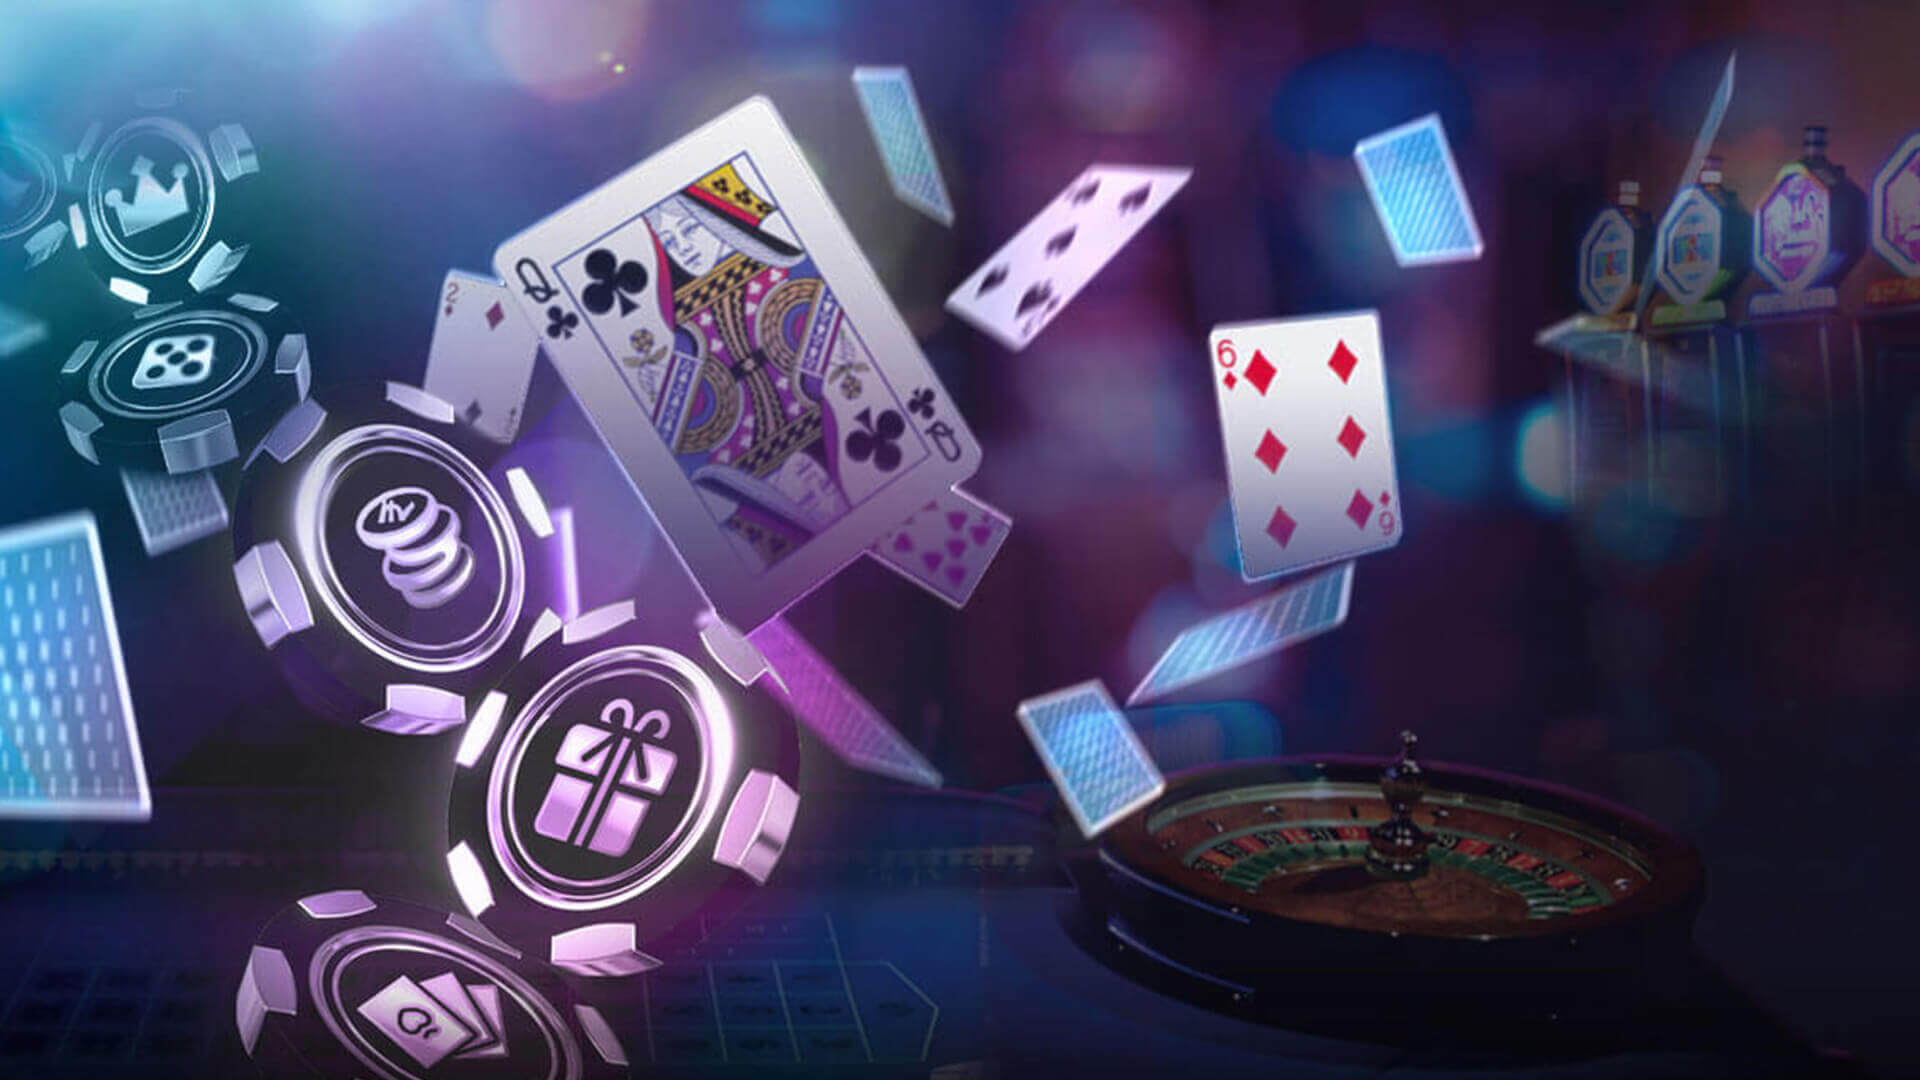 What made online casinos a preferred choice for gamblers?